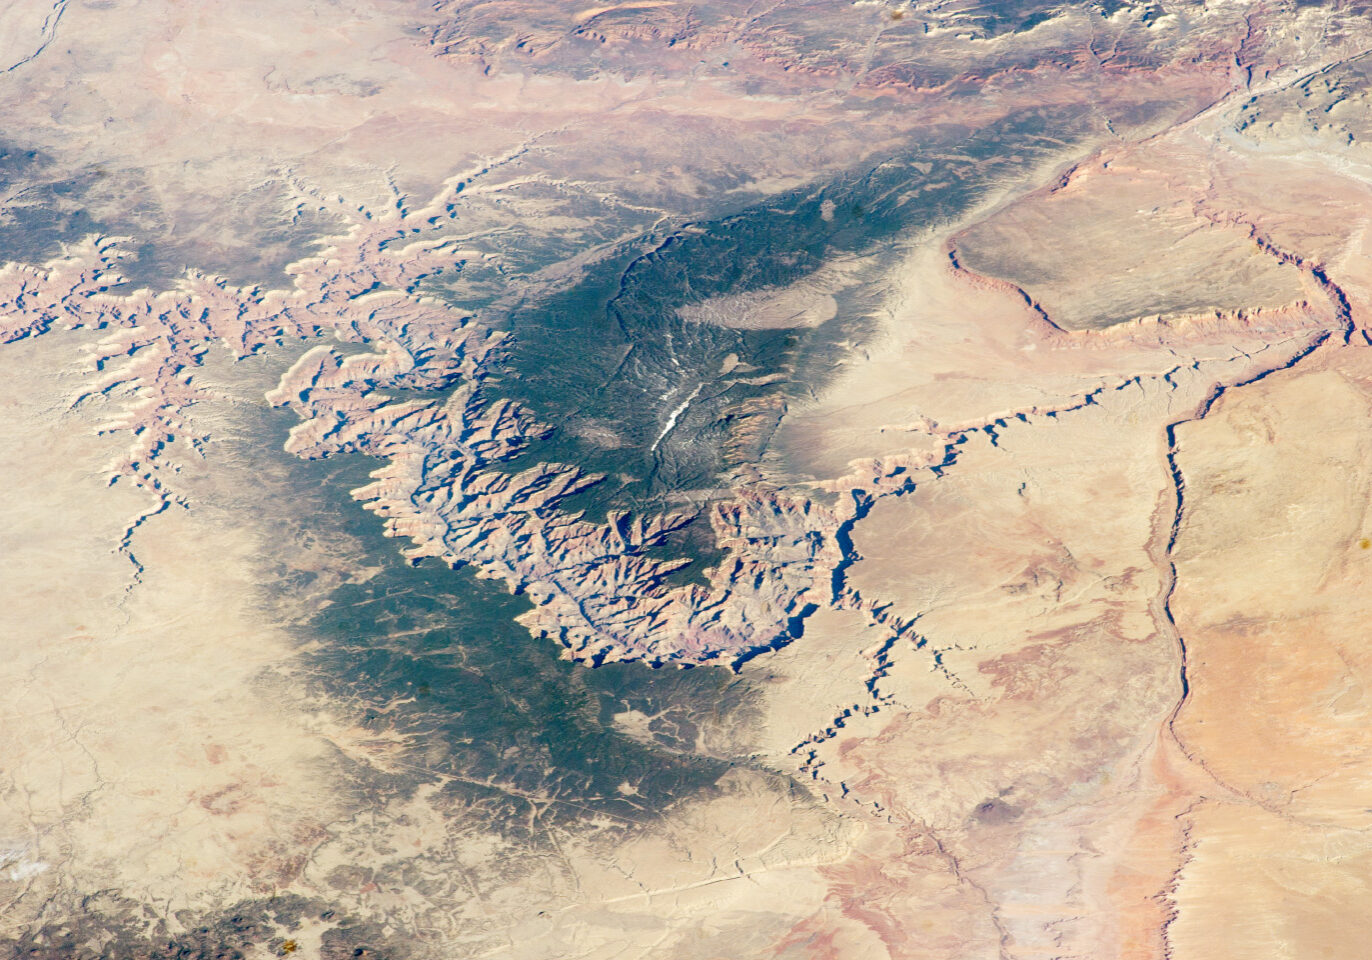 Grand Canyon from International Space Station. public domain